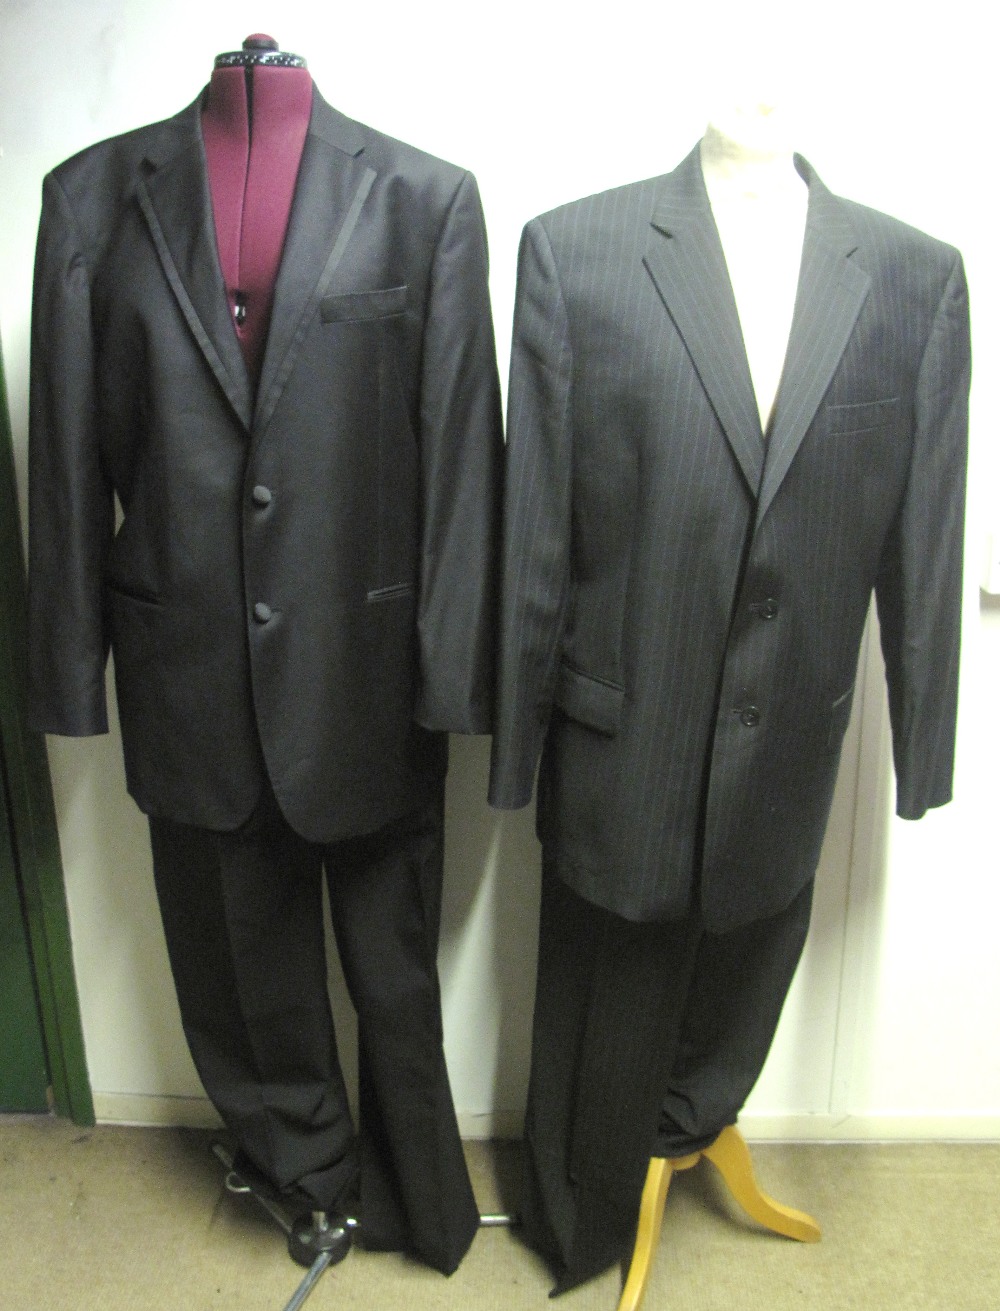 Six designer fine wool men's suits to include; a grey striped suit by Hugo Boss, - Image 2 of 9